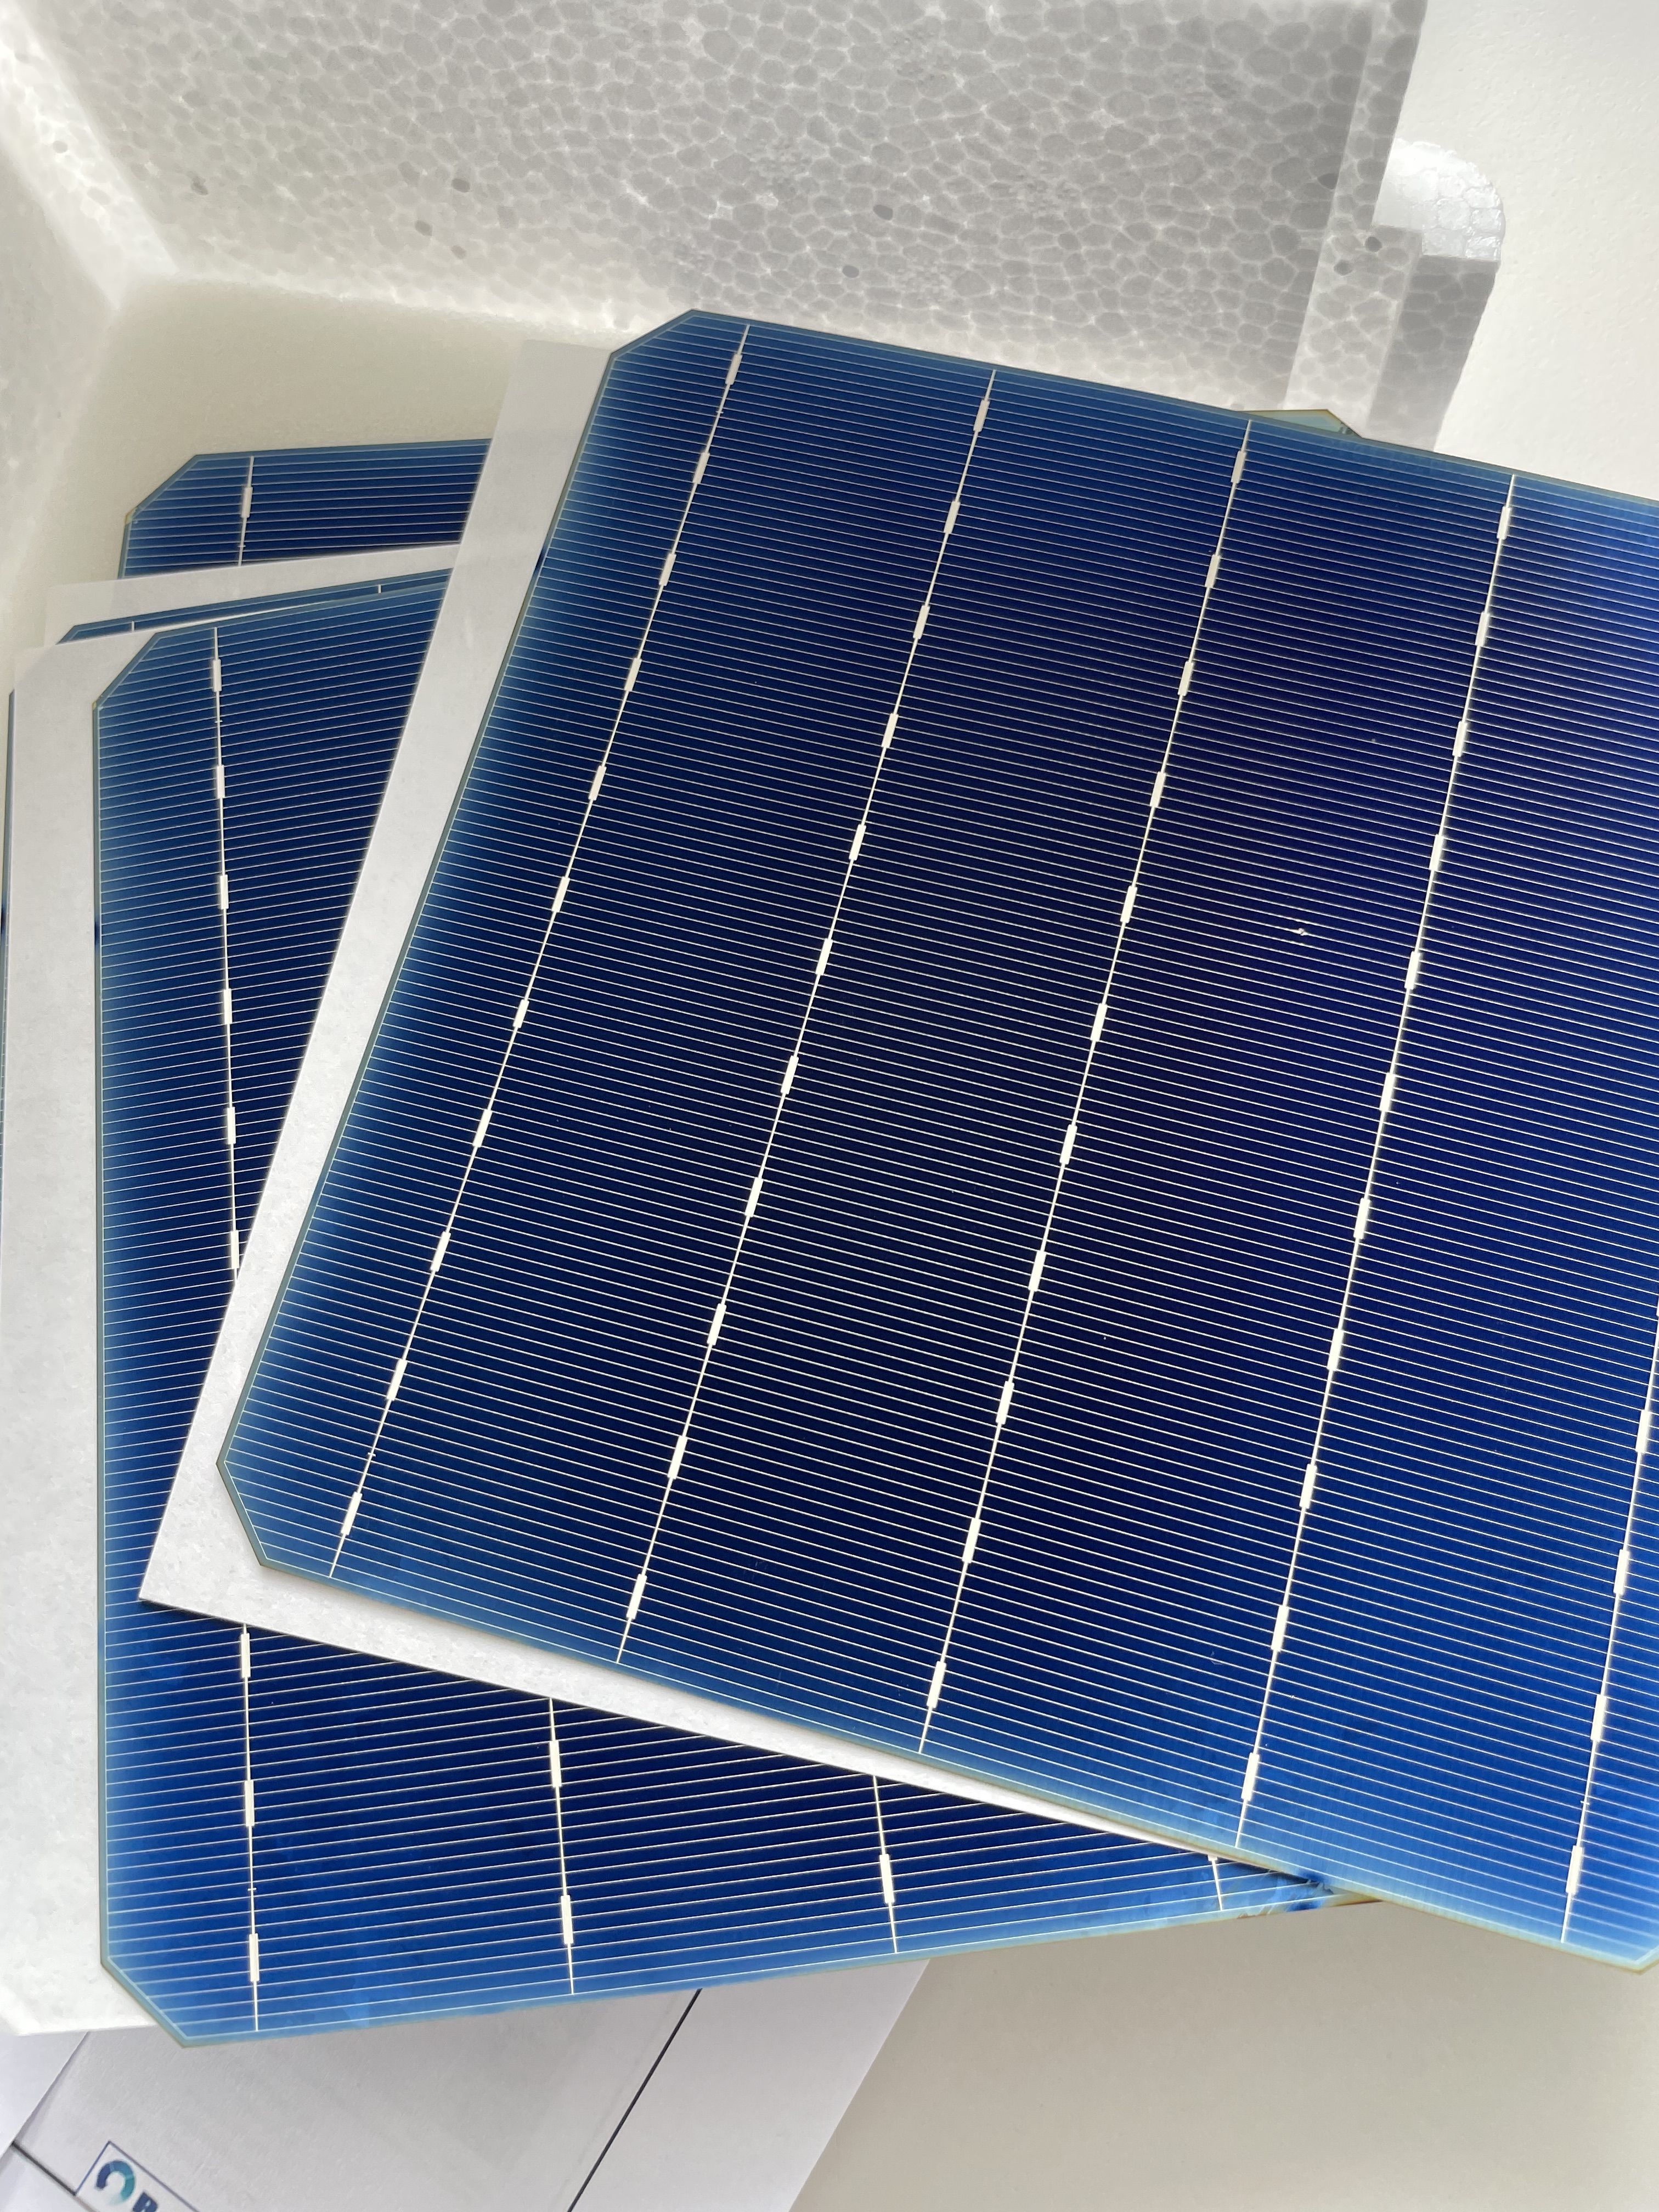 PERC solar cells made of 100 % recycled silicon with an efficiency of 19.7 percent